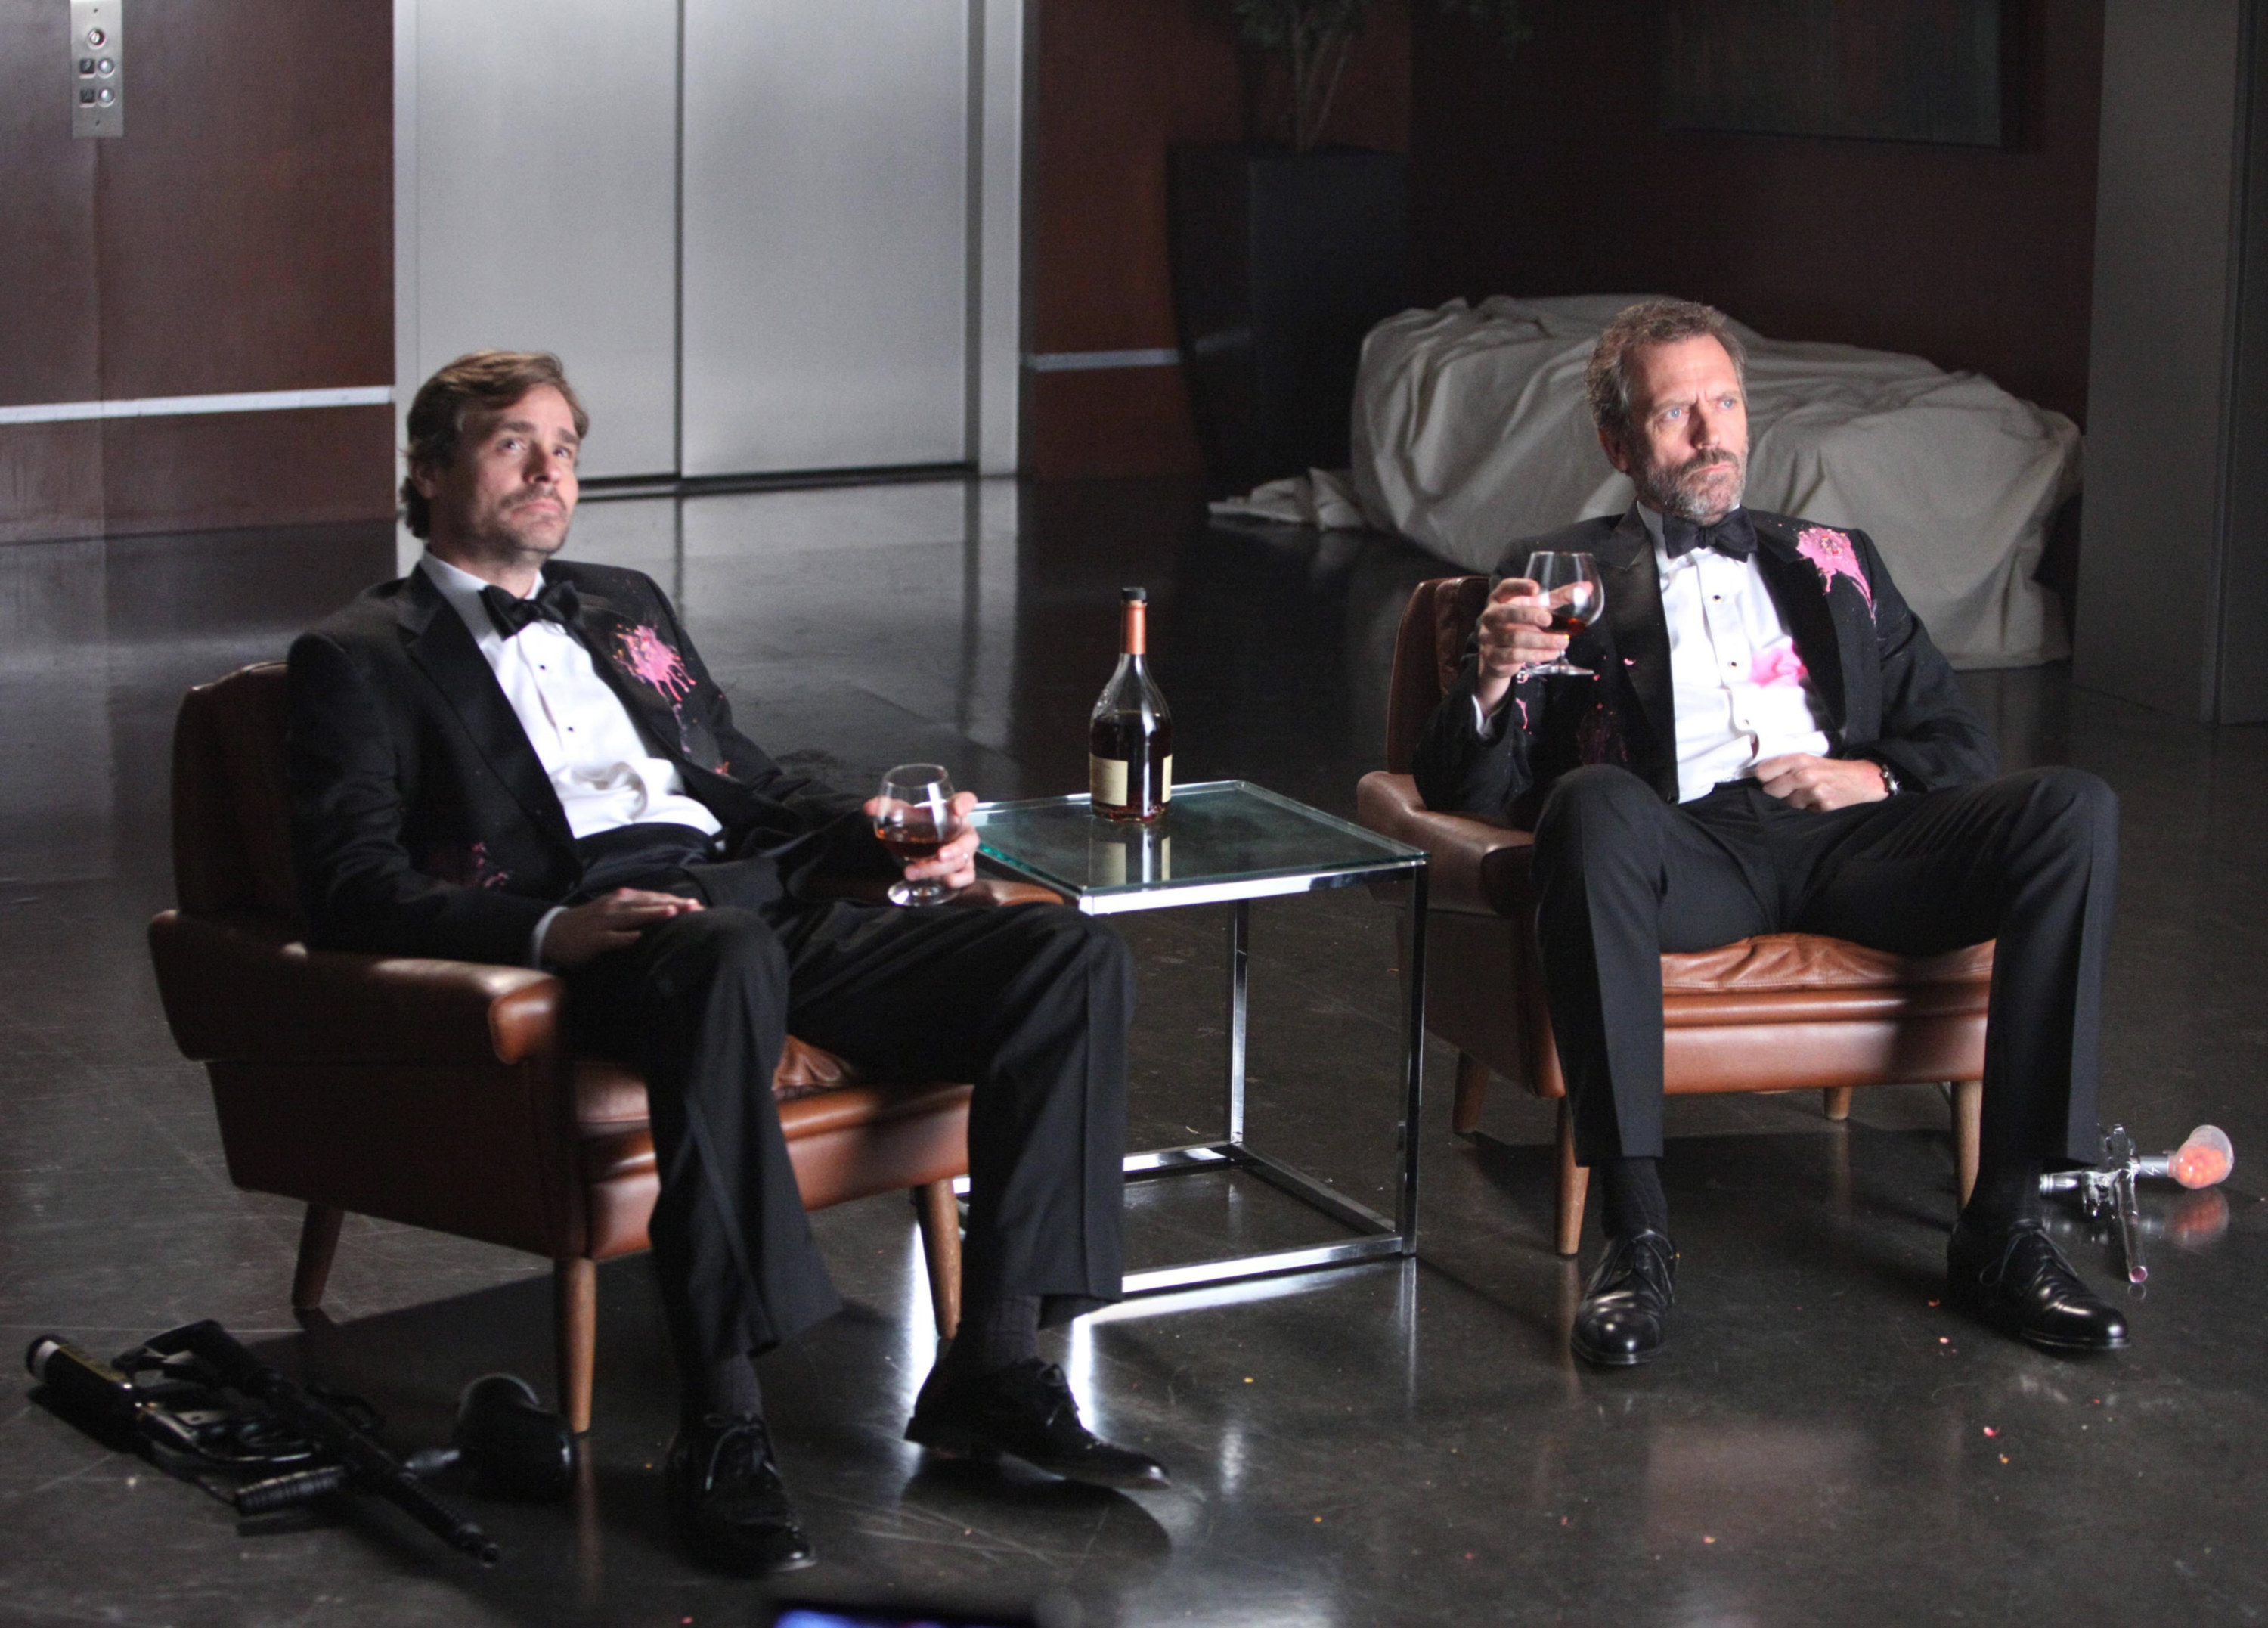 two of the characters drinking in an office